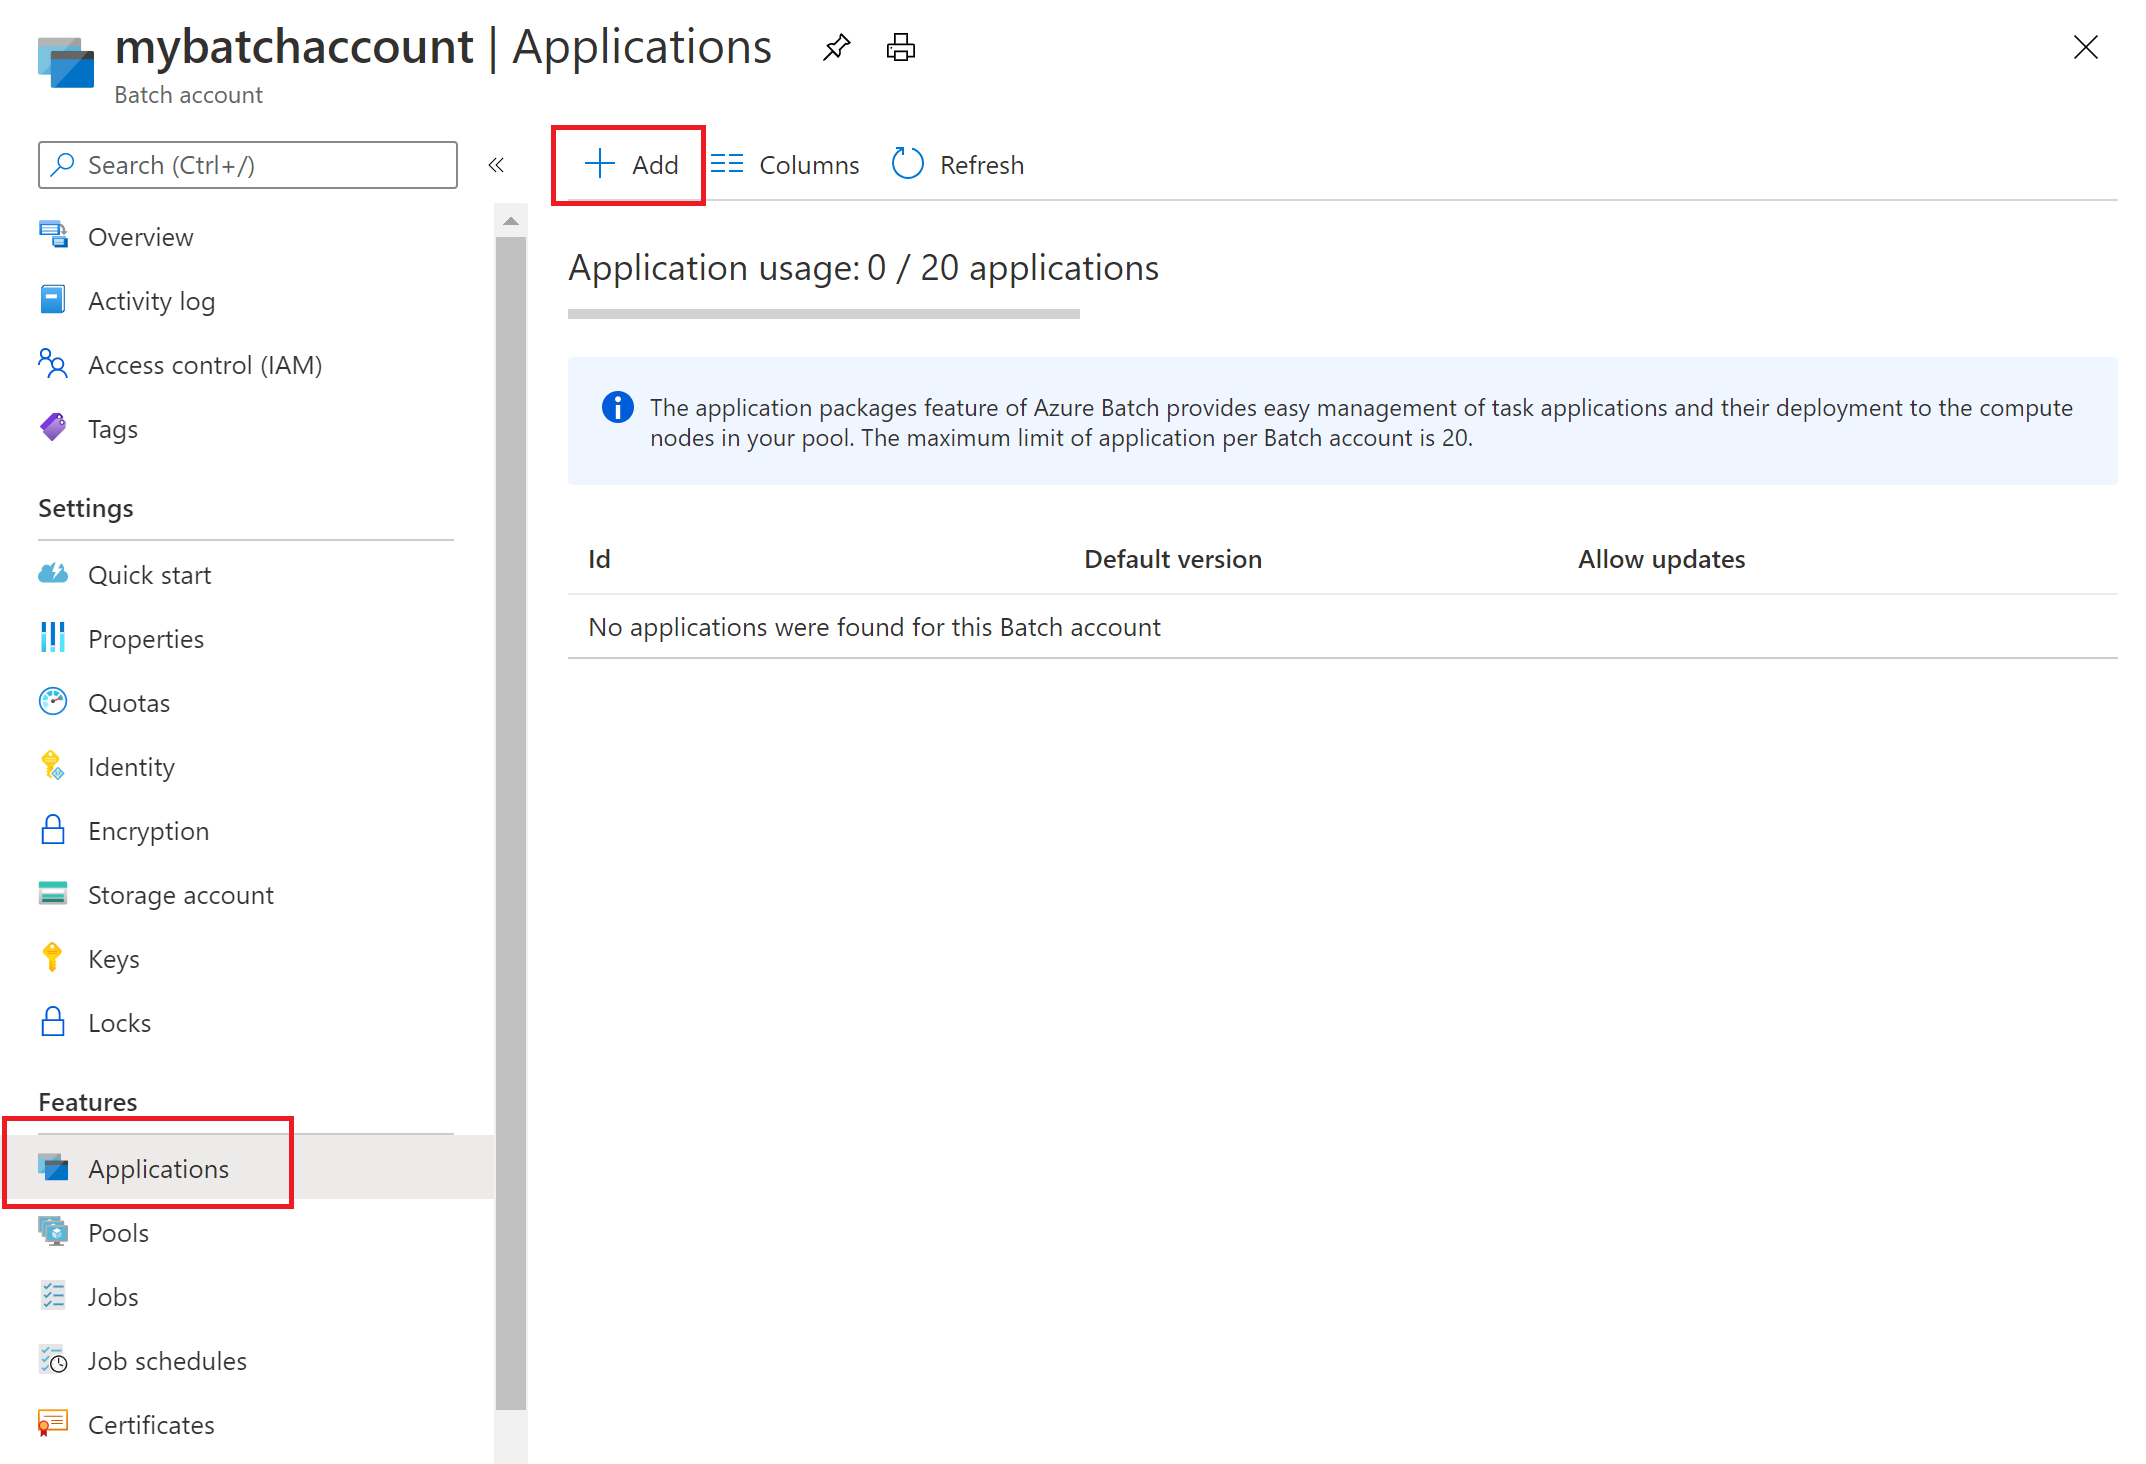 Screenshot of the Applications section of the batch account.